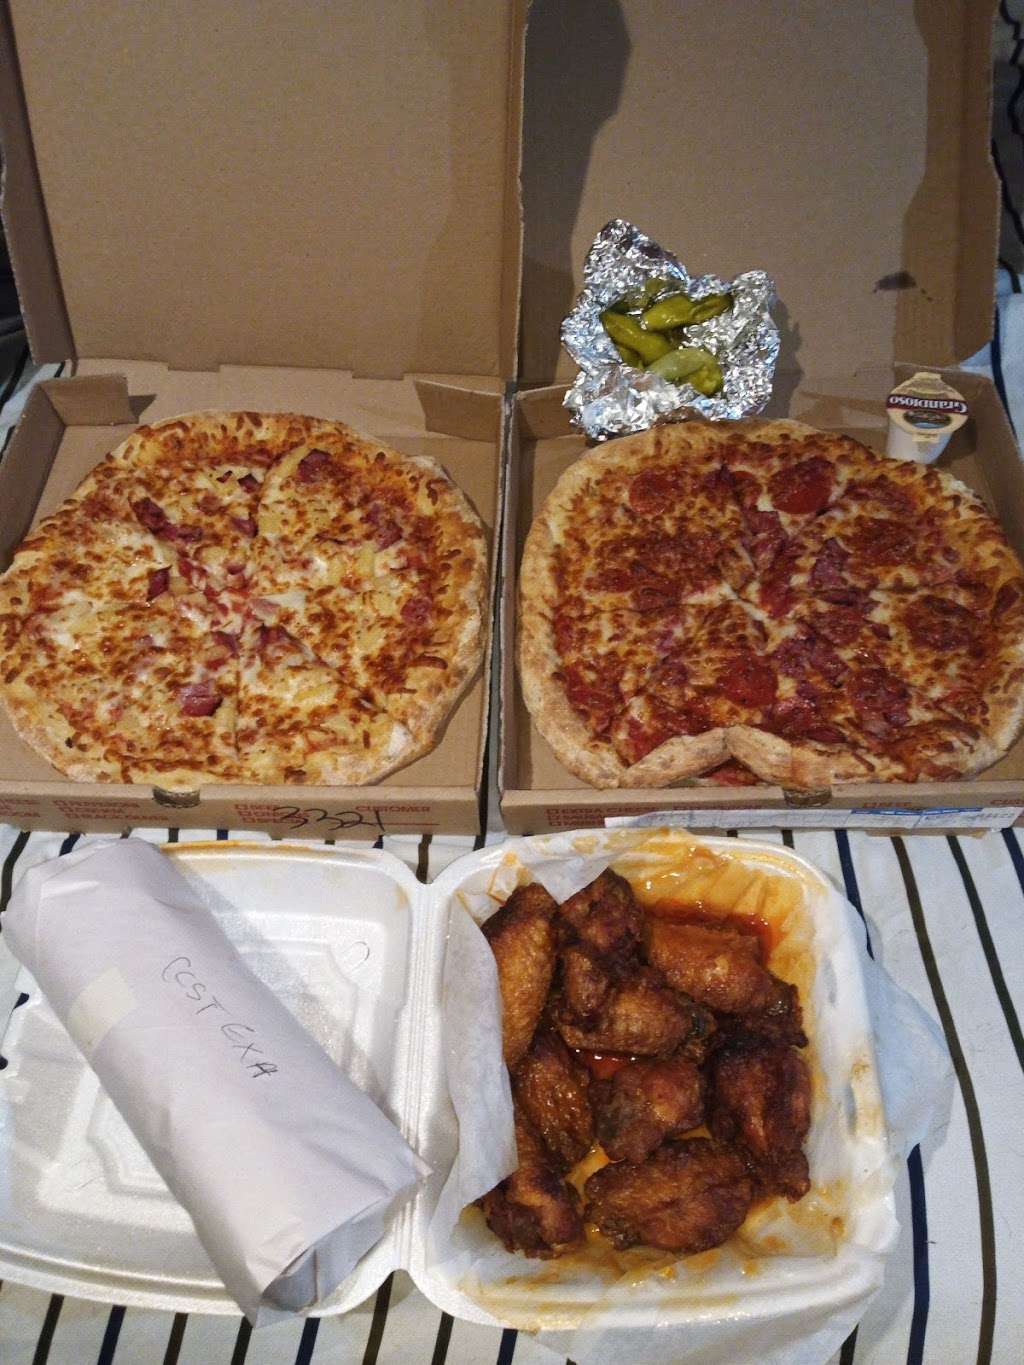 Billys Pizza & Wings | 3124, 5005 Erdman Ave, Baltimore, MD 21205, USA | Phone: (410) 732-7111